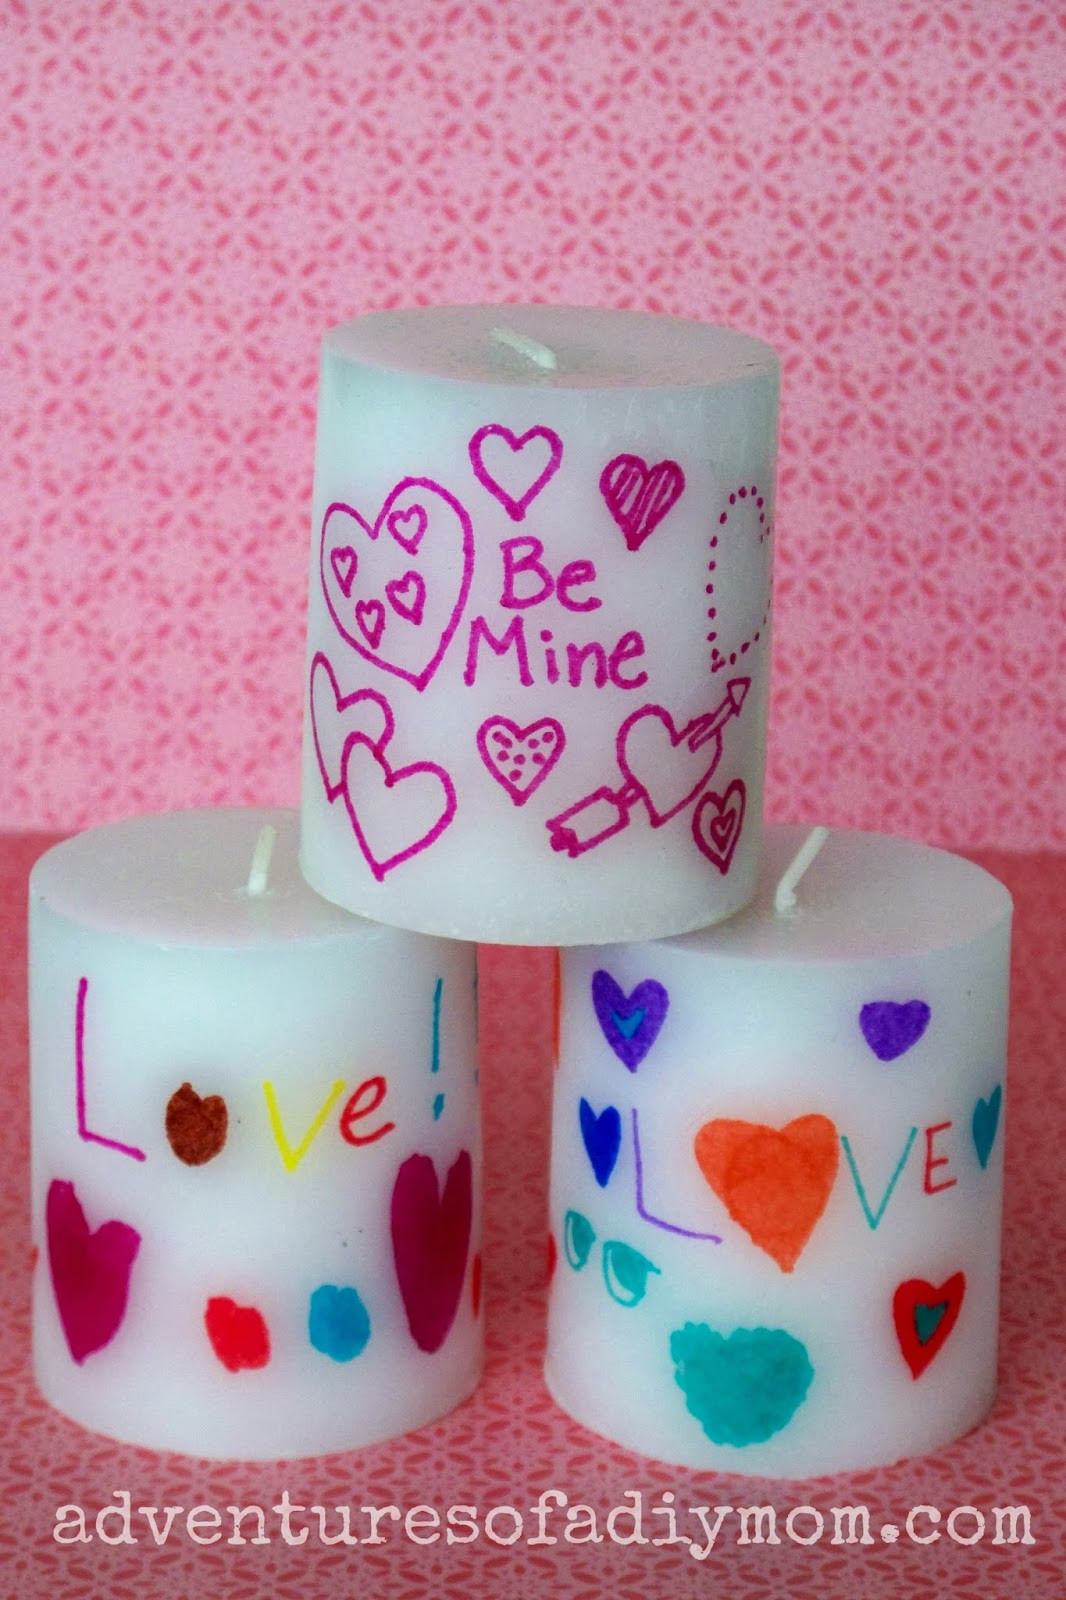 Personal Valentines Gift Ideas
 Personalized Valentines Candles Adventures of a DIY Mom